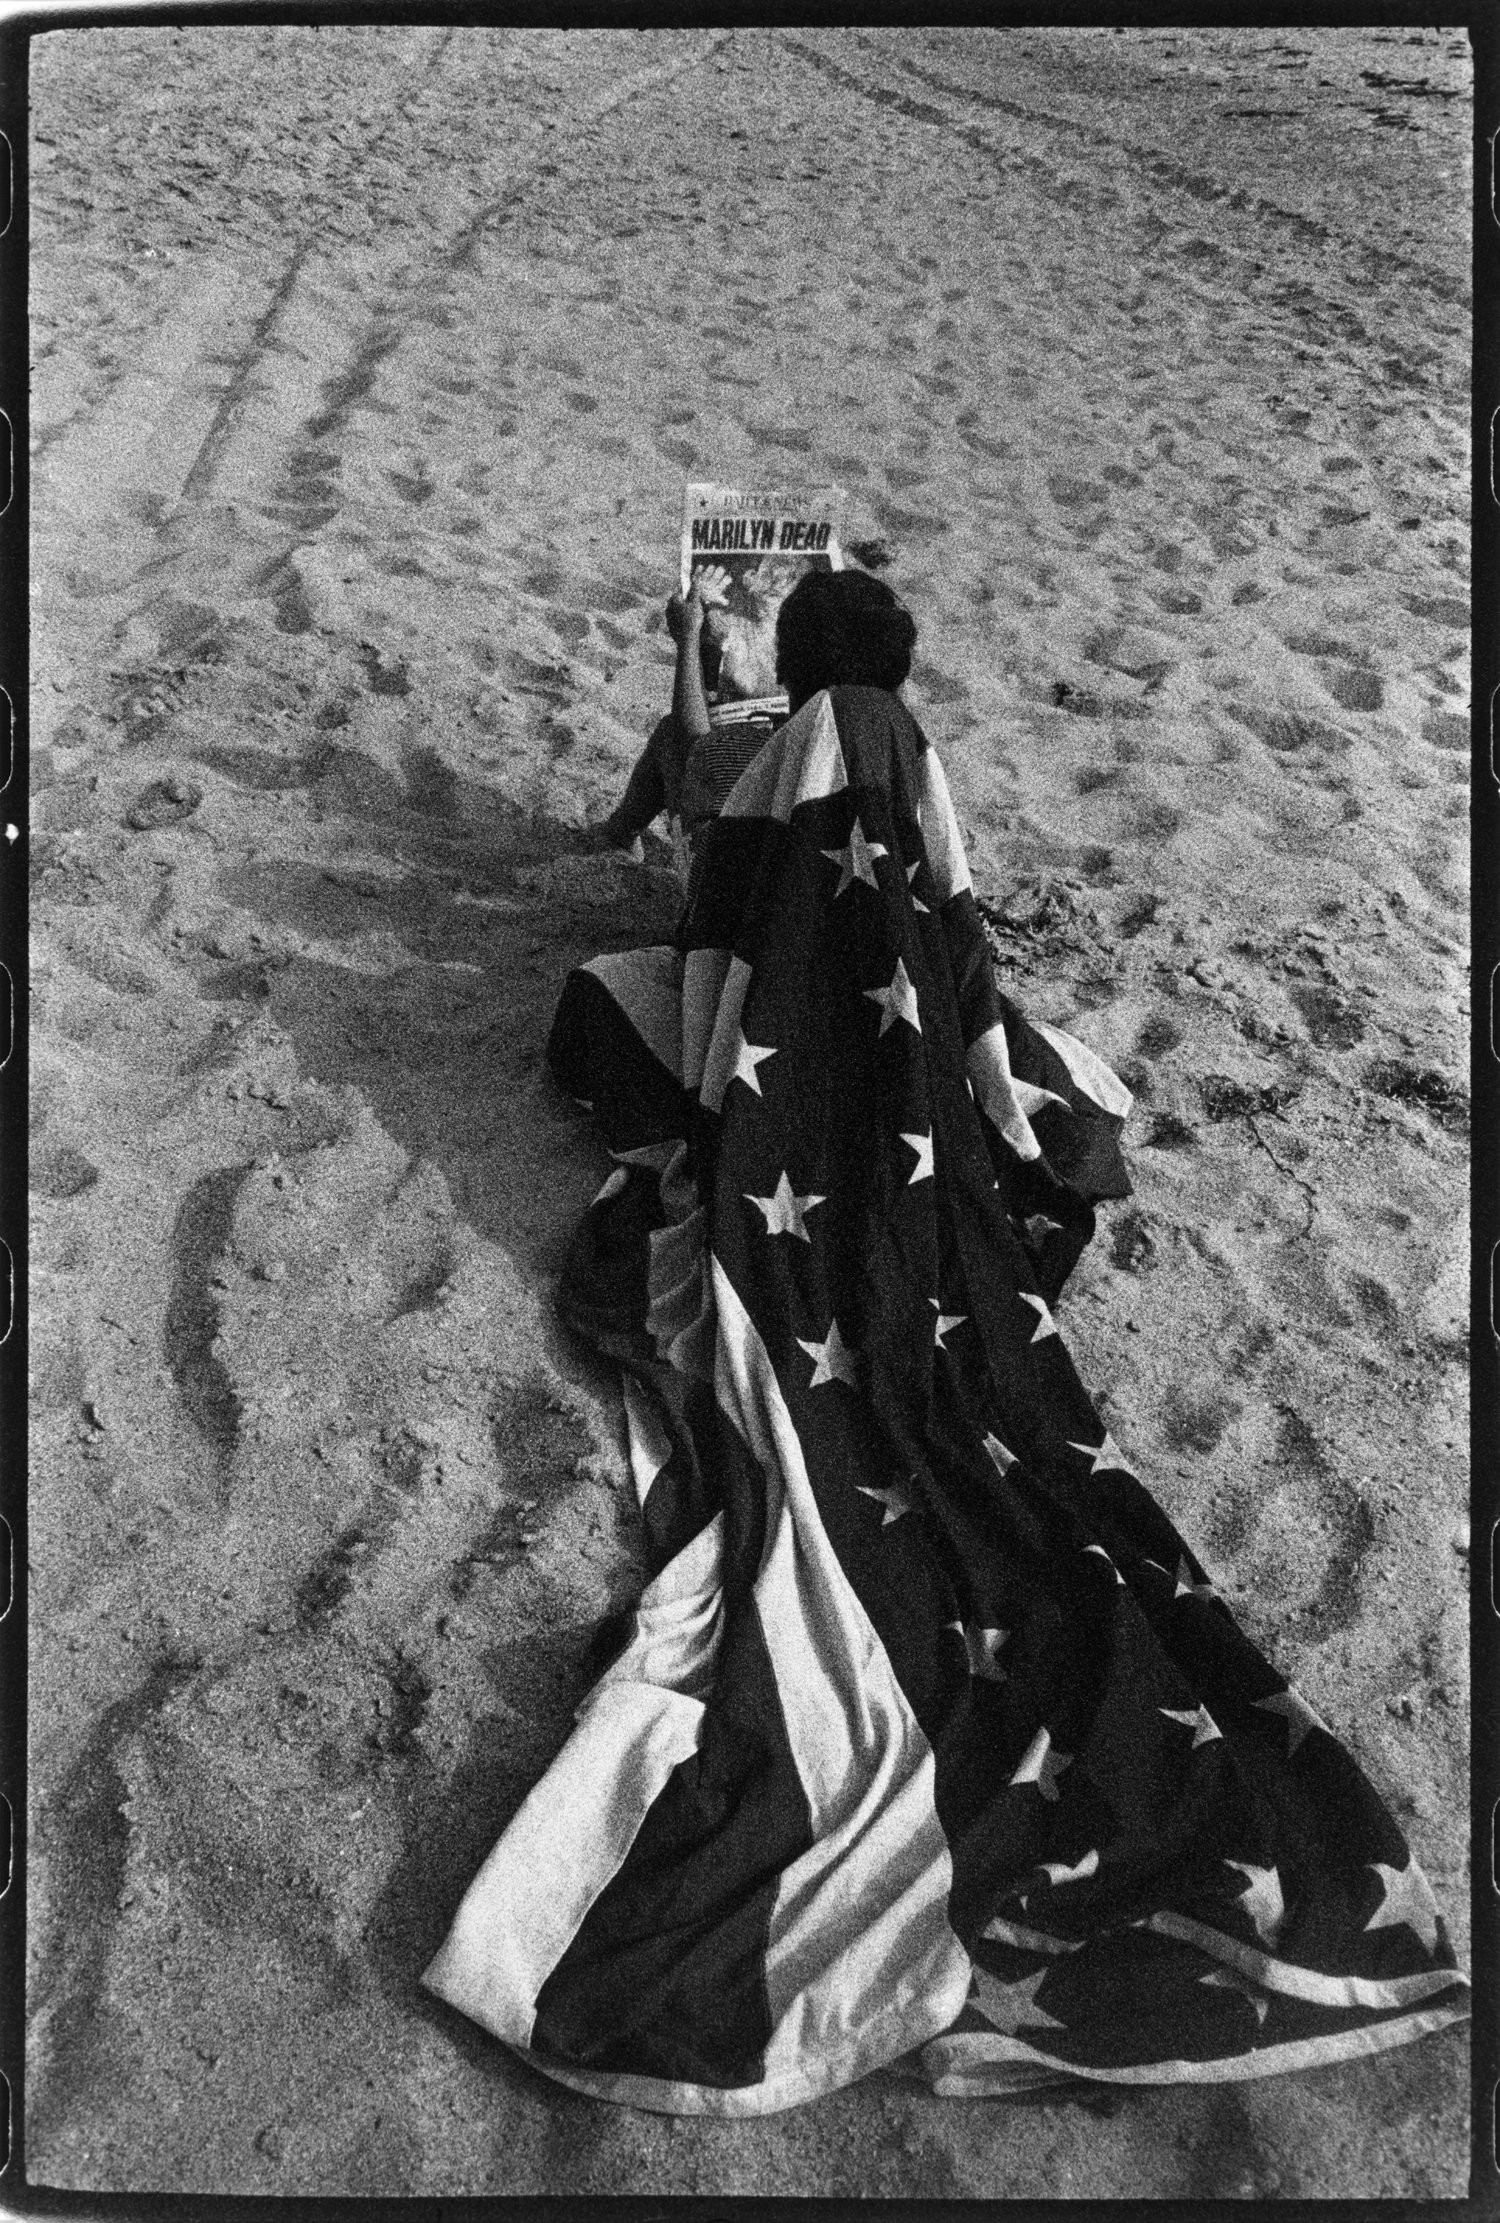  Robert Frank , Cape Cod, the day the Daily News came out,  1962 made 1960s. Courtesy of the Pilara Family Foundation Collection and Sotheby’s.&nbsp; 